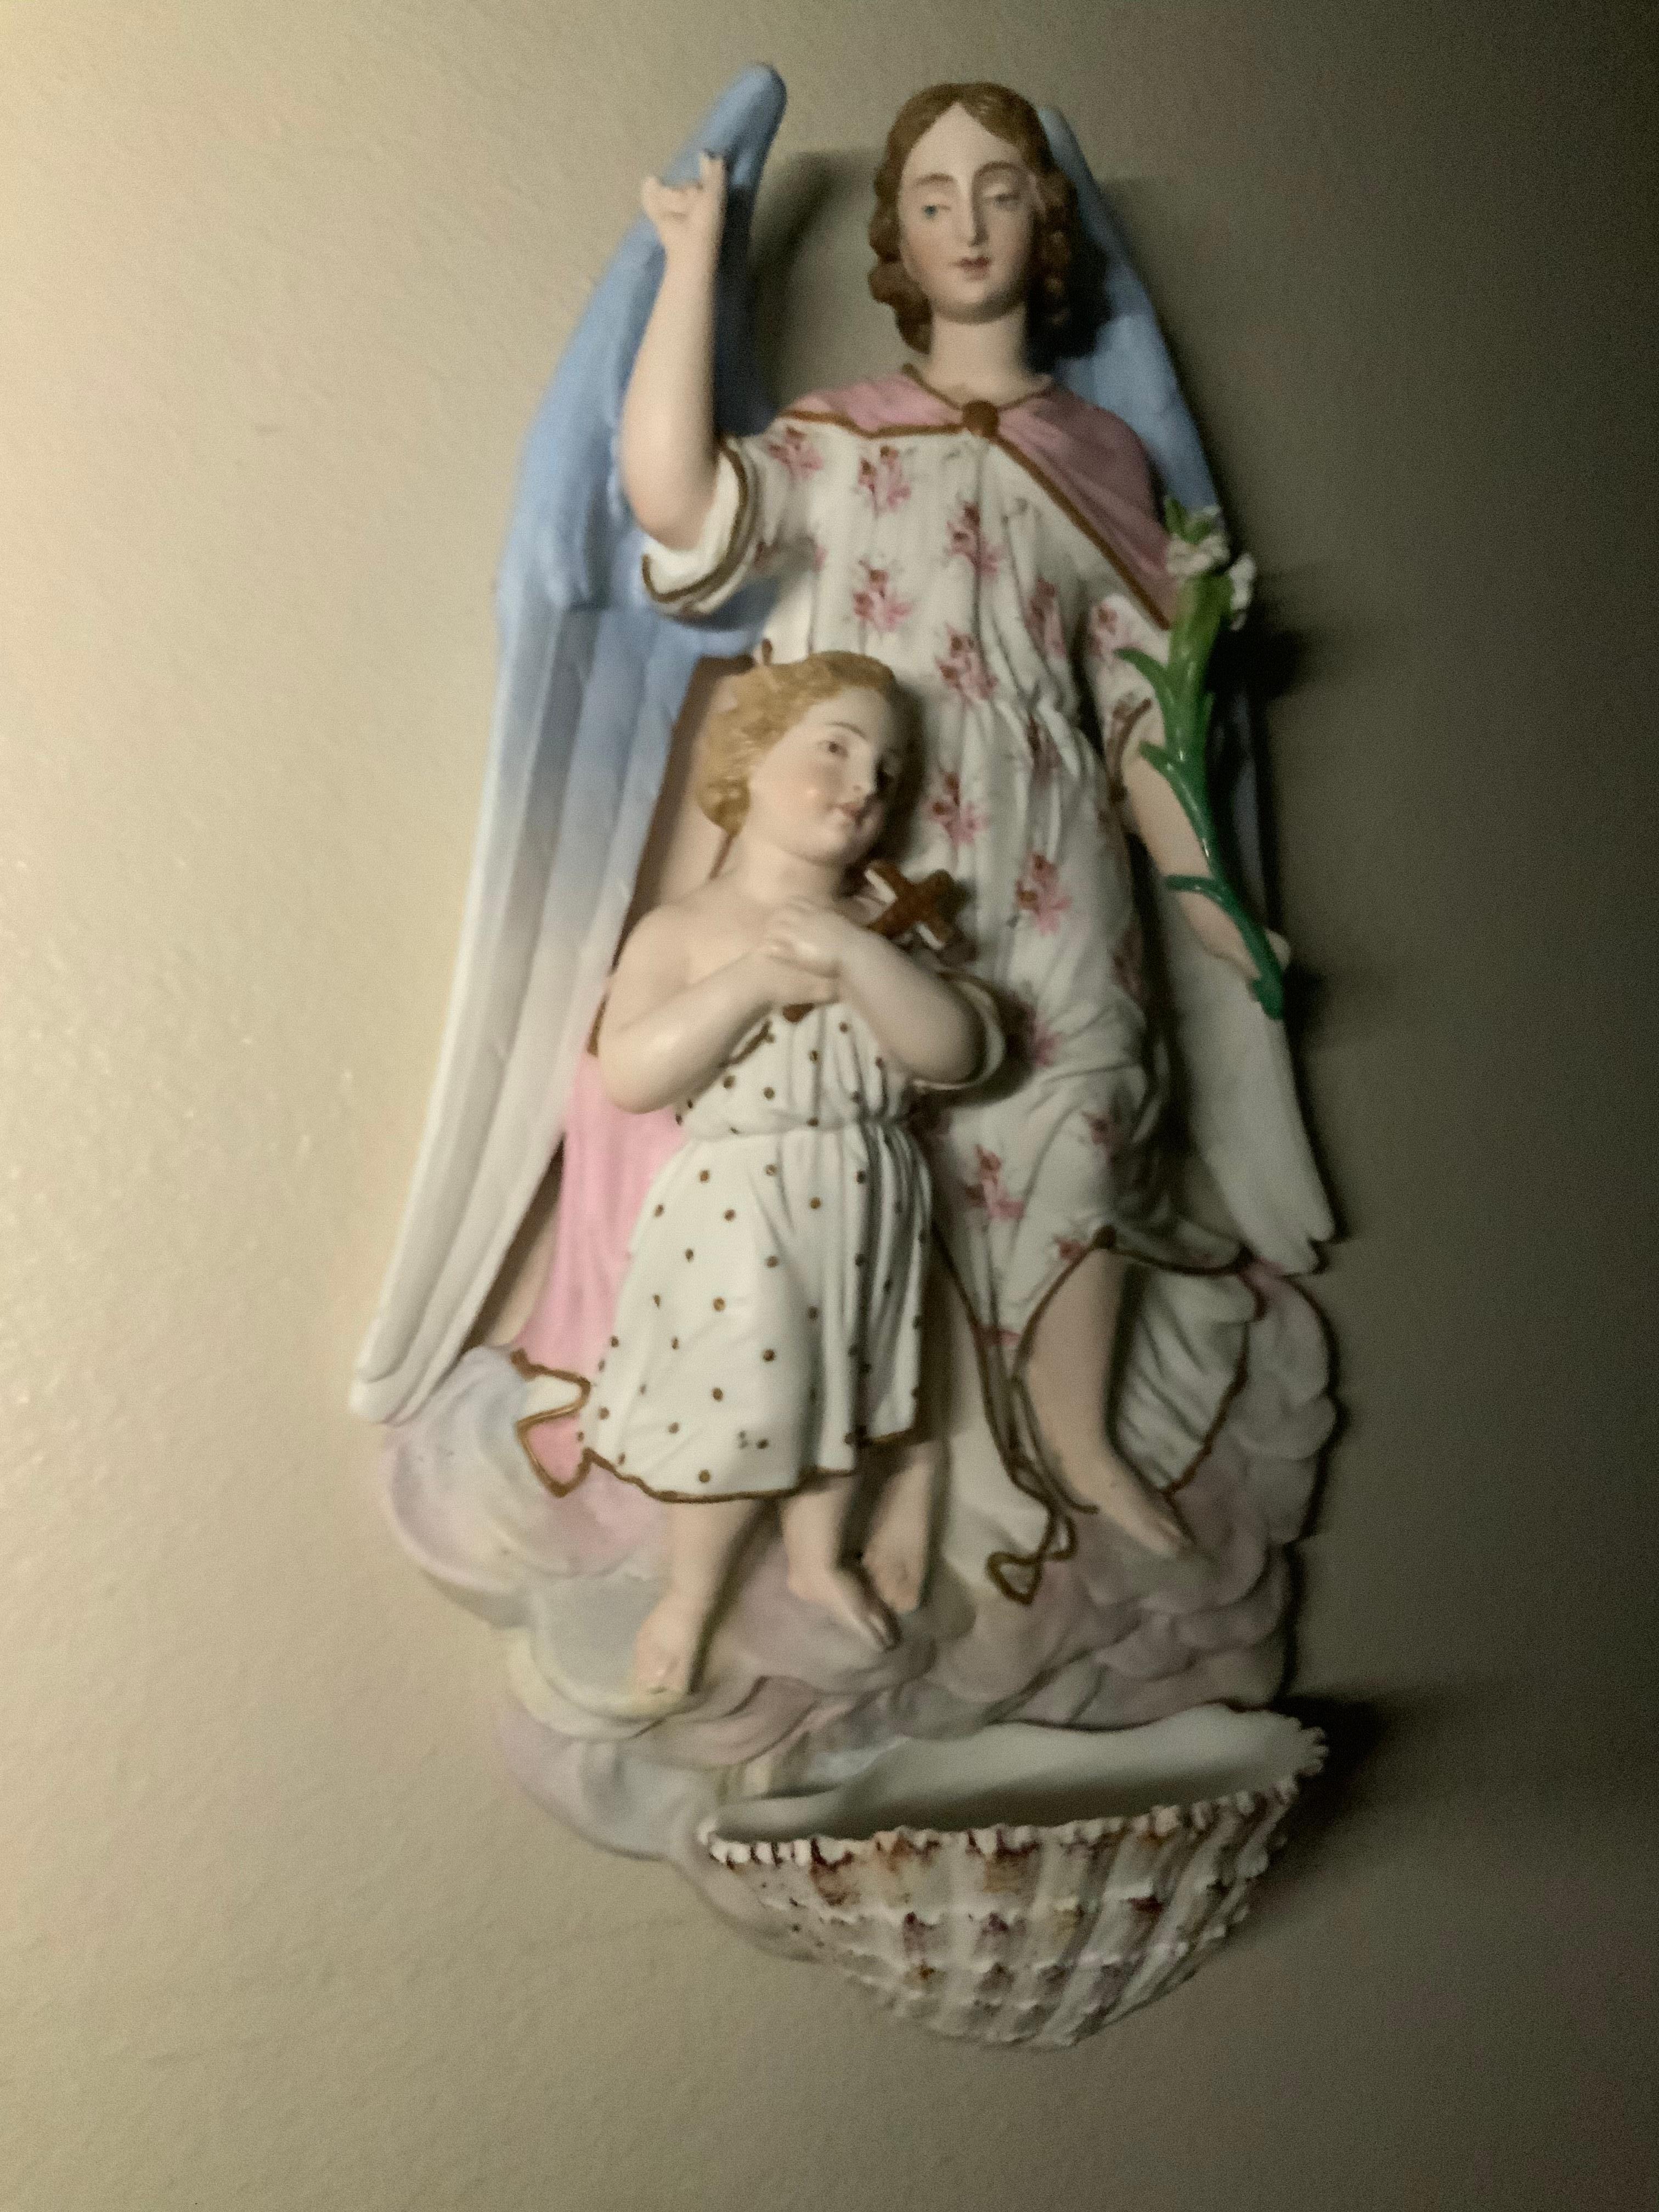 This is a hand painted bisque porcelain sculpture of a large winged guardian angel behind a child. The angel is dressed with a white robe printed with pink flowers and a pink cape and is holding a branch of Calla lilies in the left hand. The large